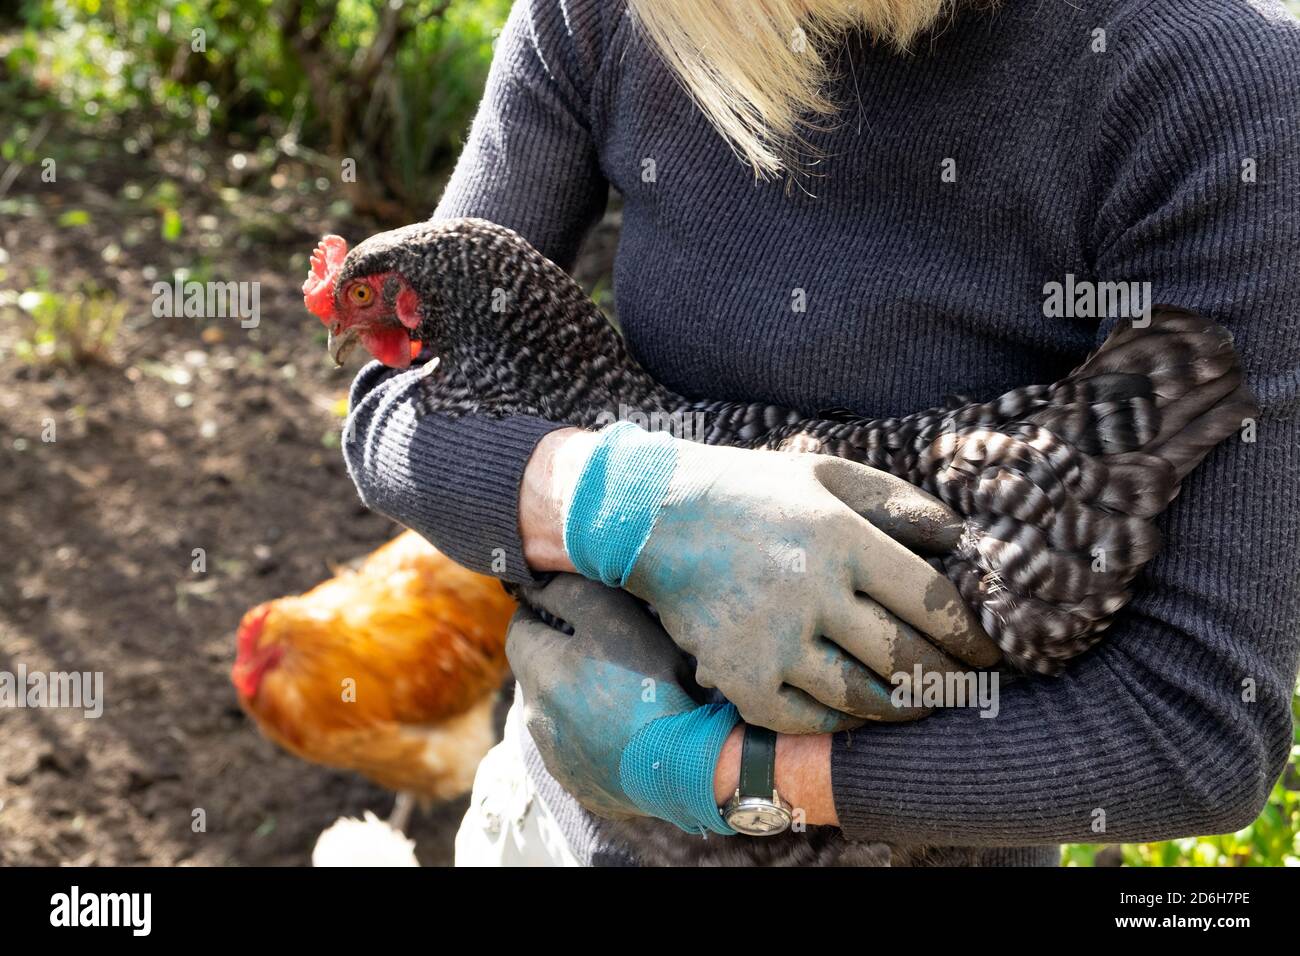 Premium Photo  Outdoor mature woman farmer holding in hands two small newborn  baby chickens, country rustic style, golden hour